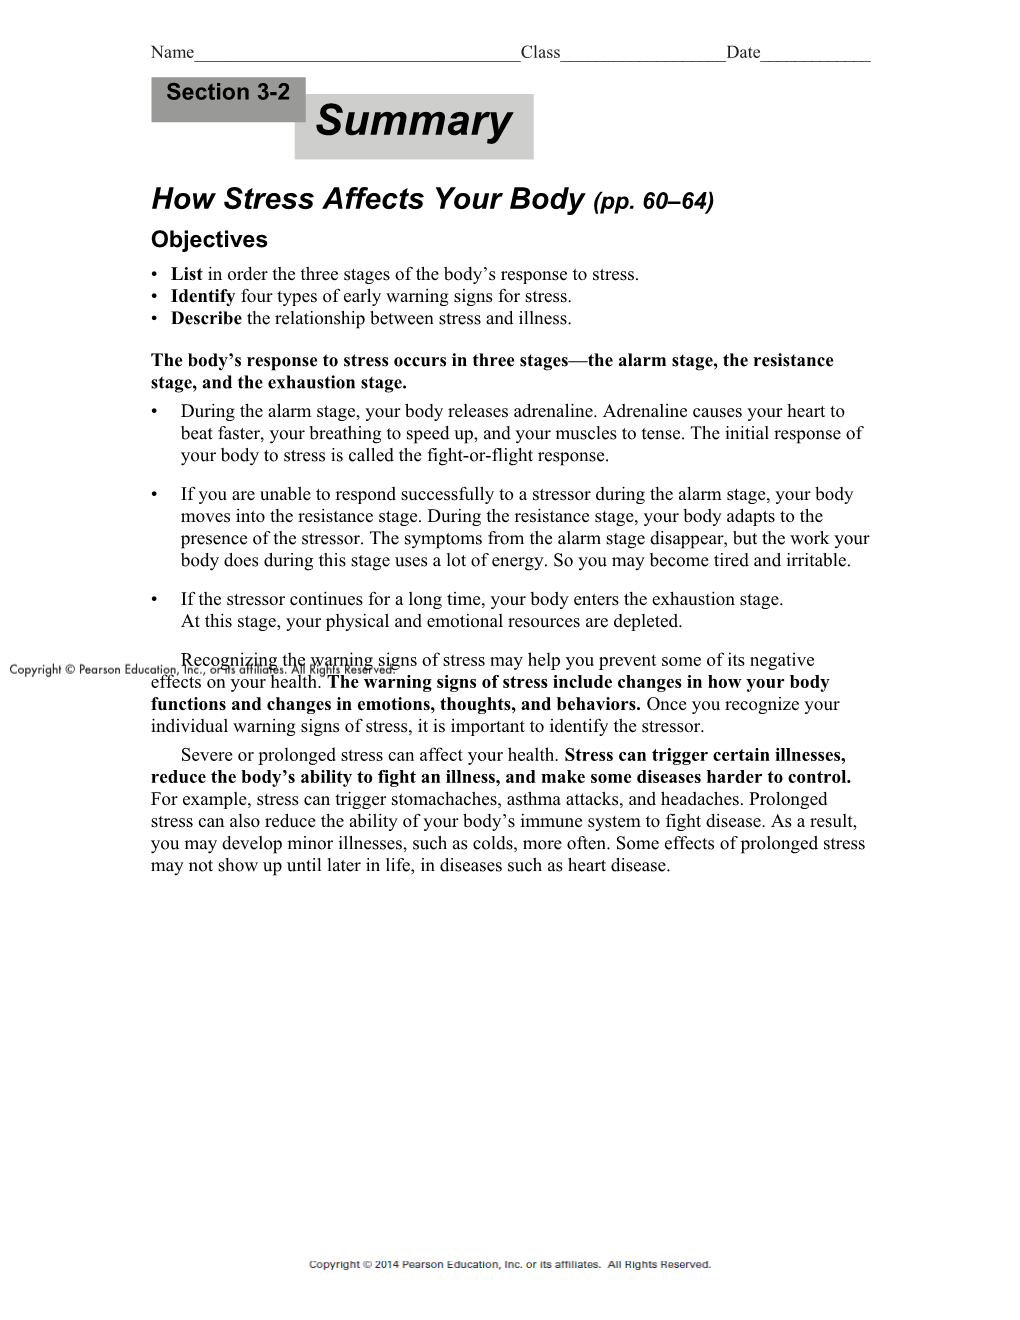 List in Order the Three Stages of the Body S Response to Stress